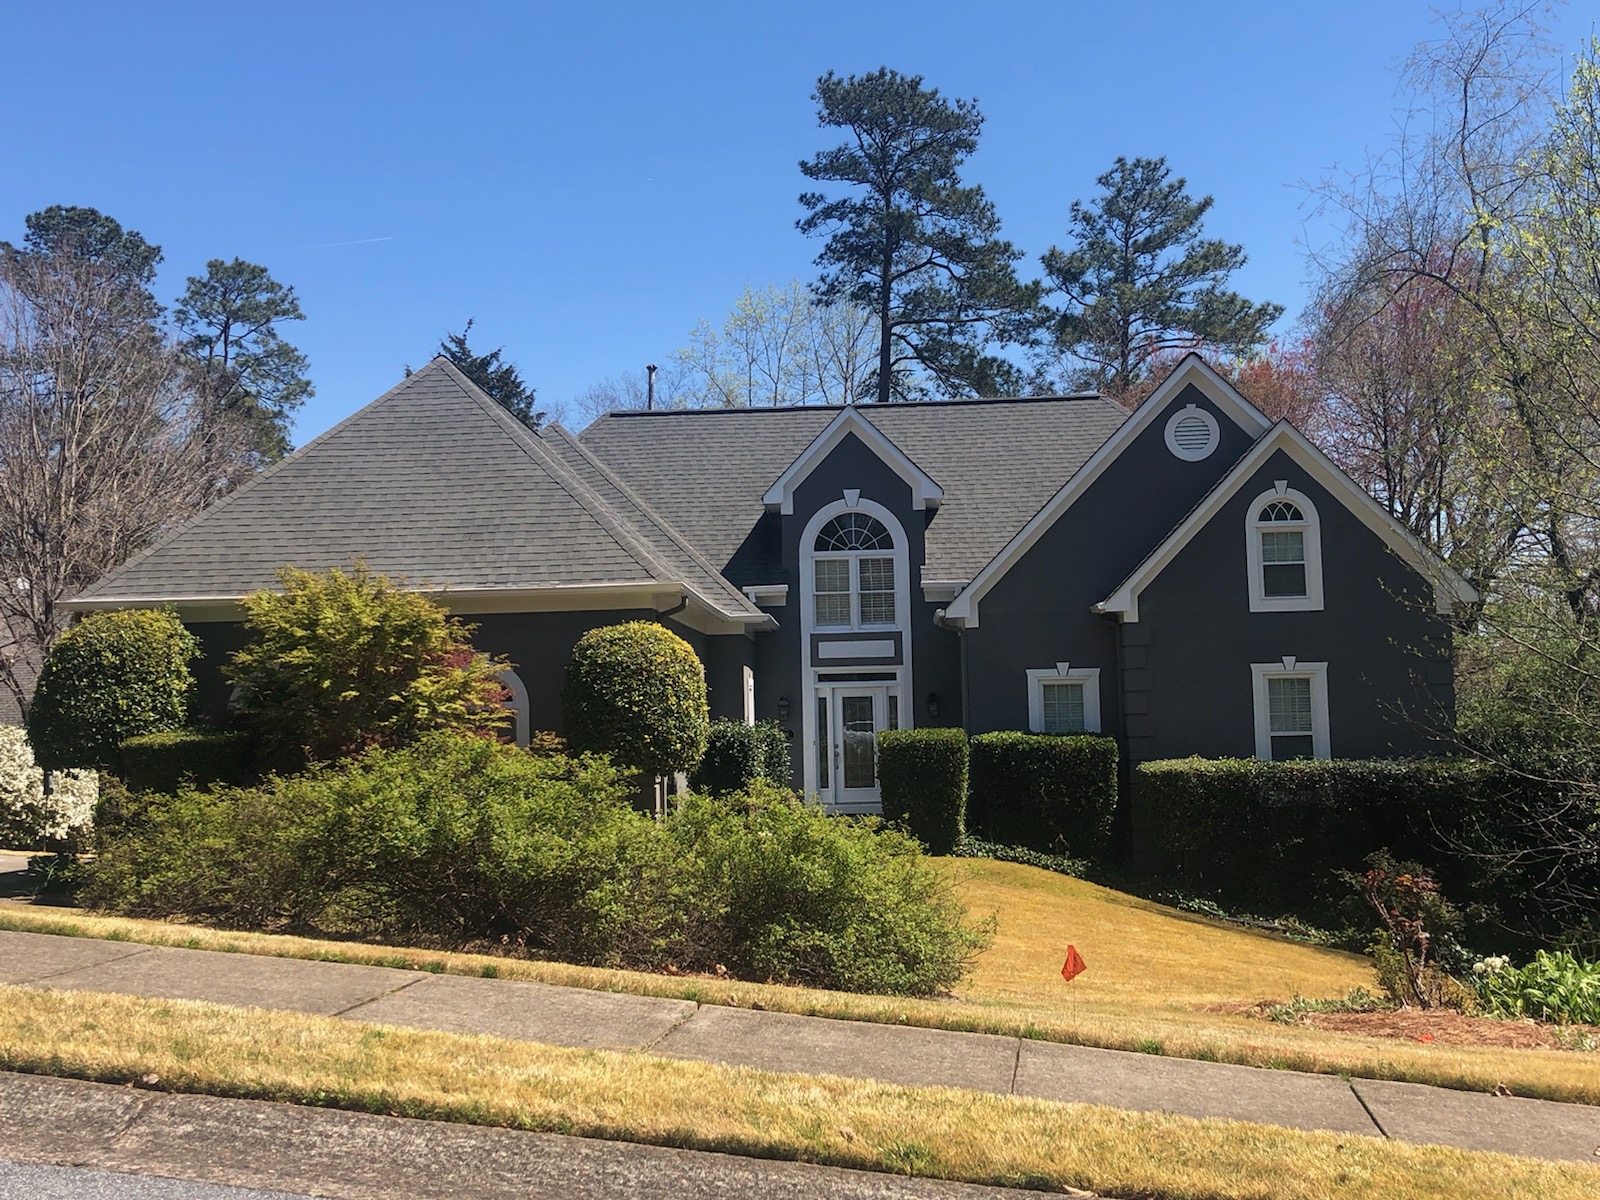 exterior painting project by certapro painters of roswell ga